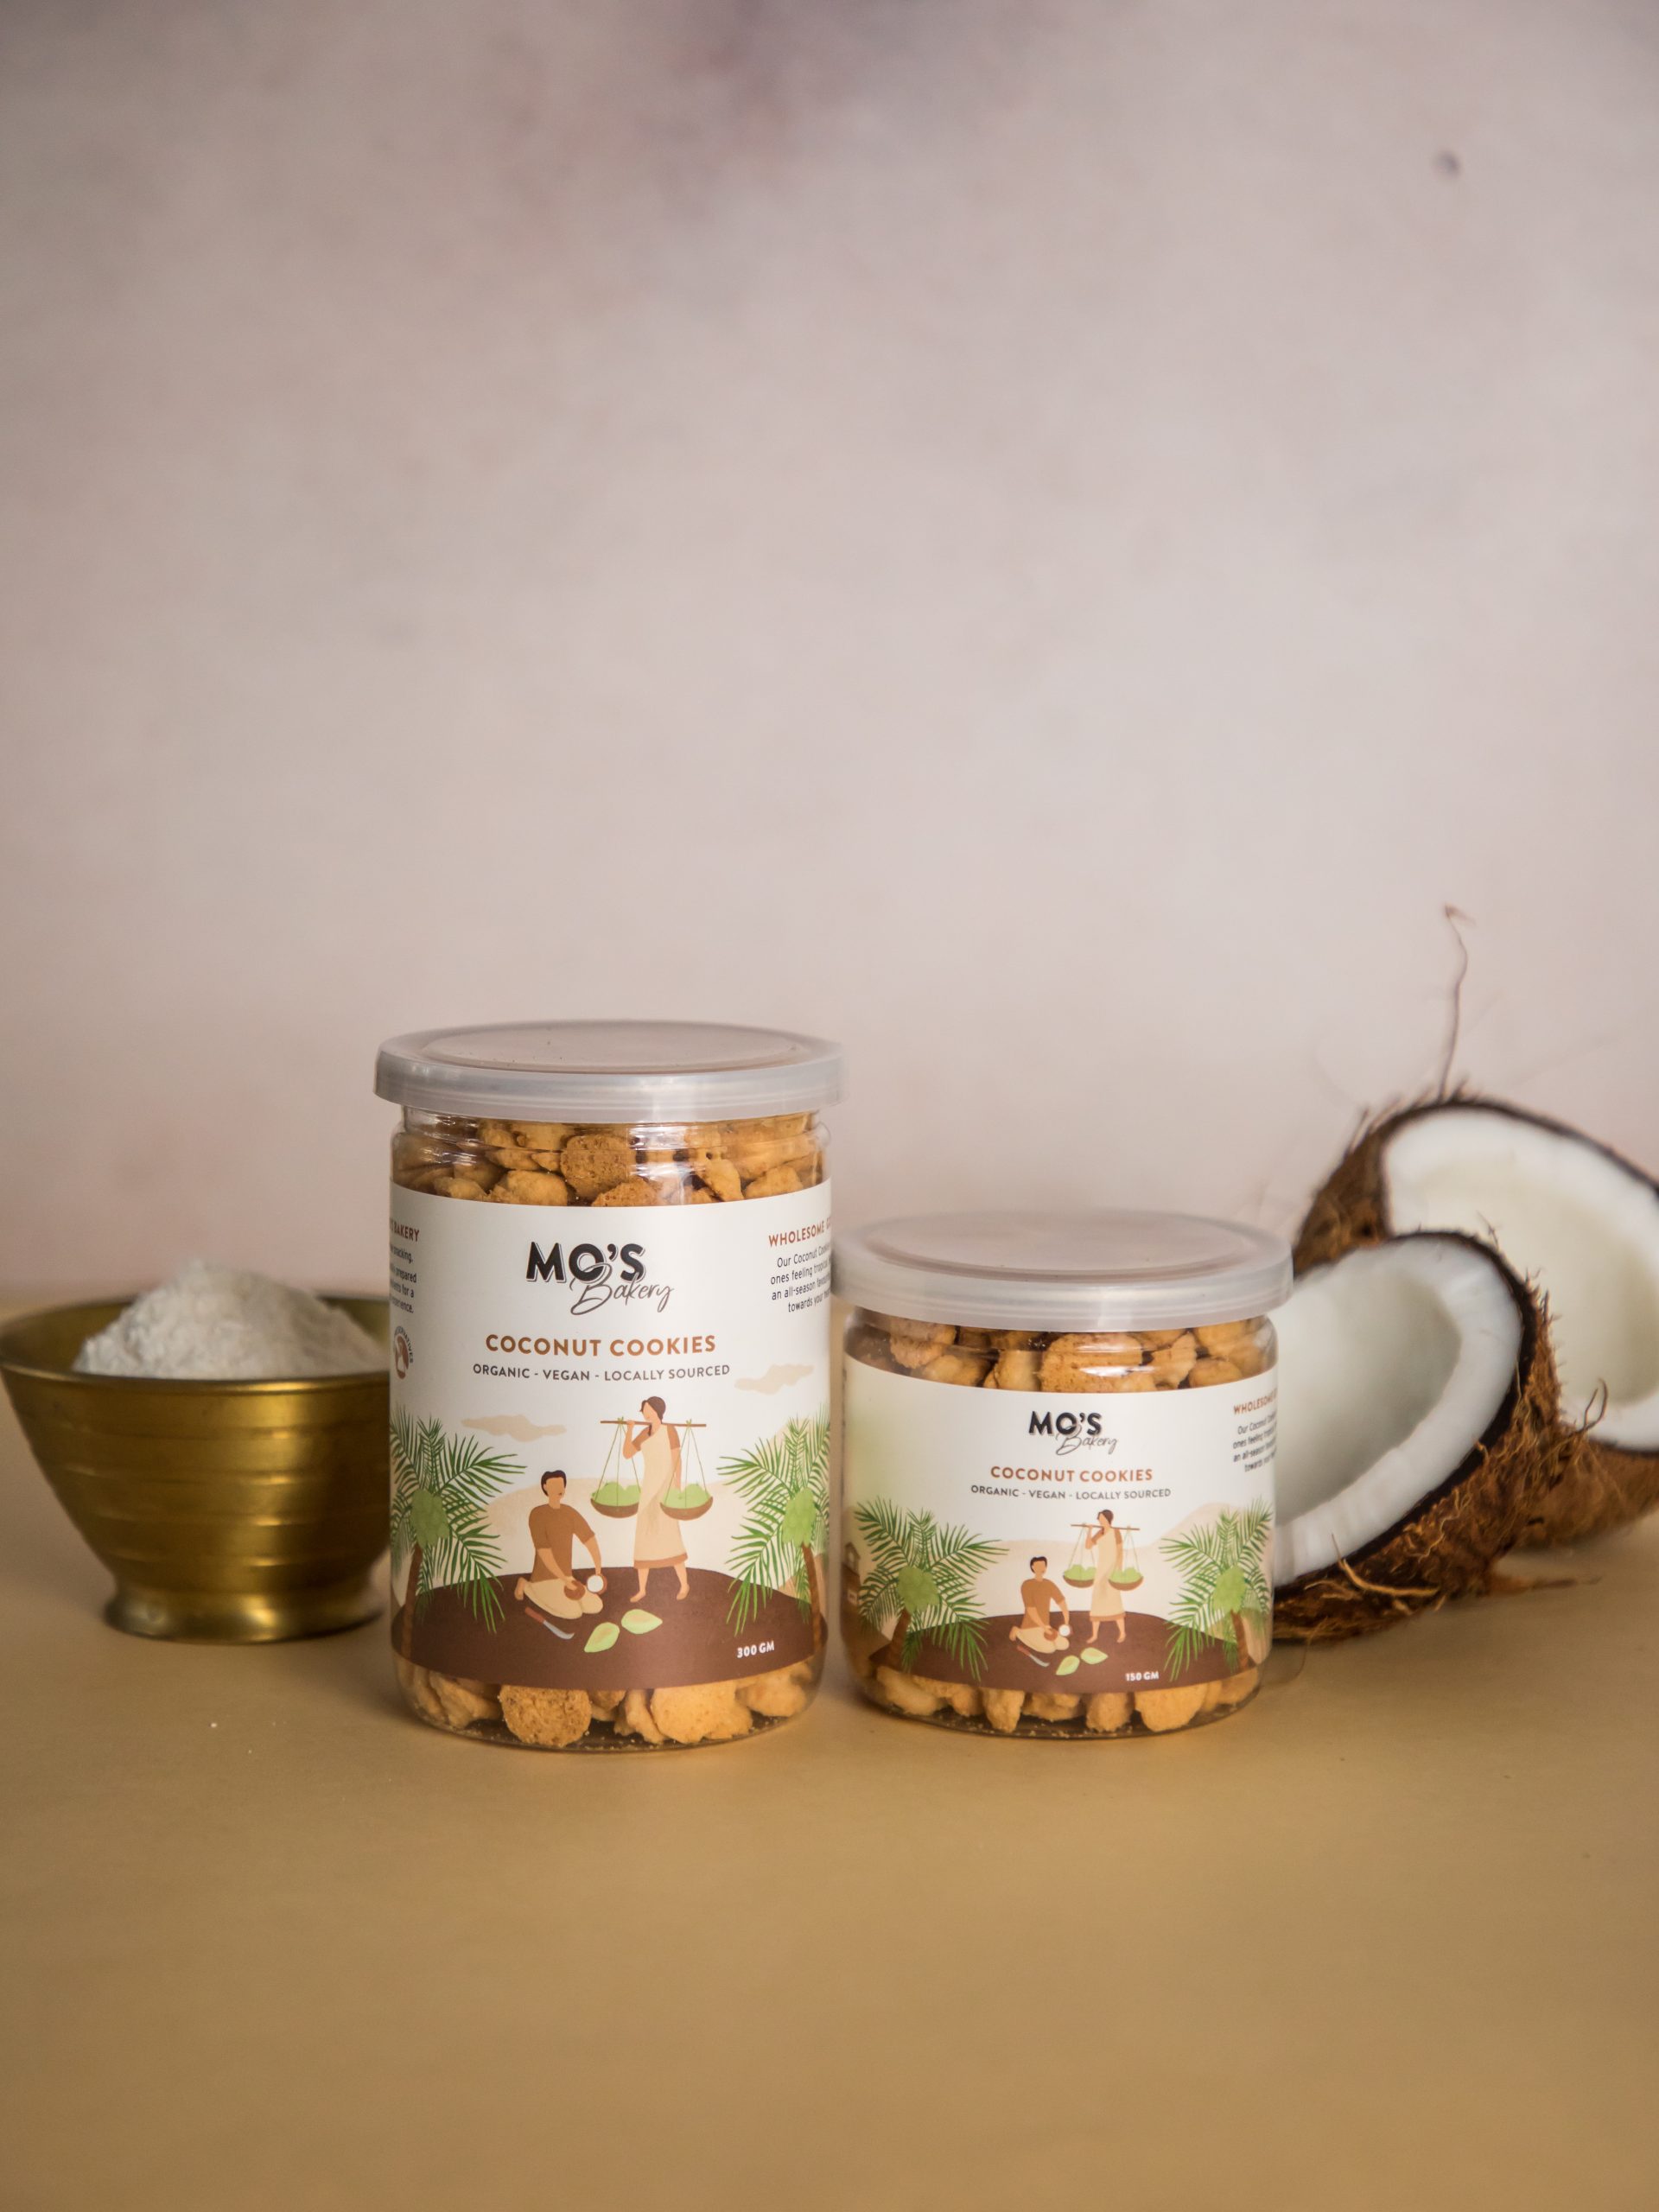 Product: Mo’s Bakery Coconut Cookies